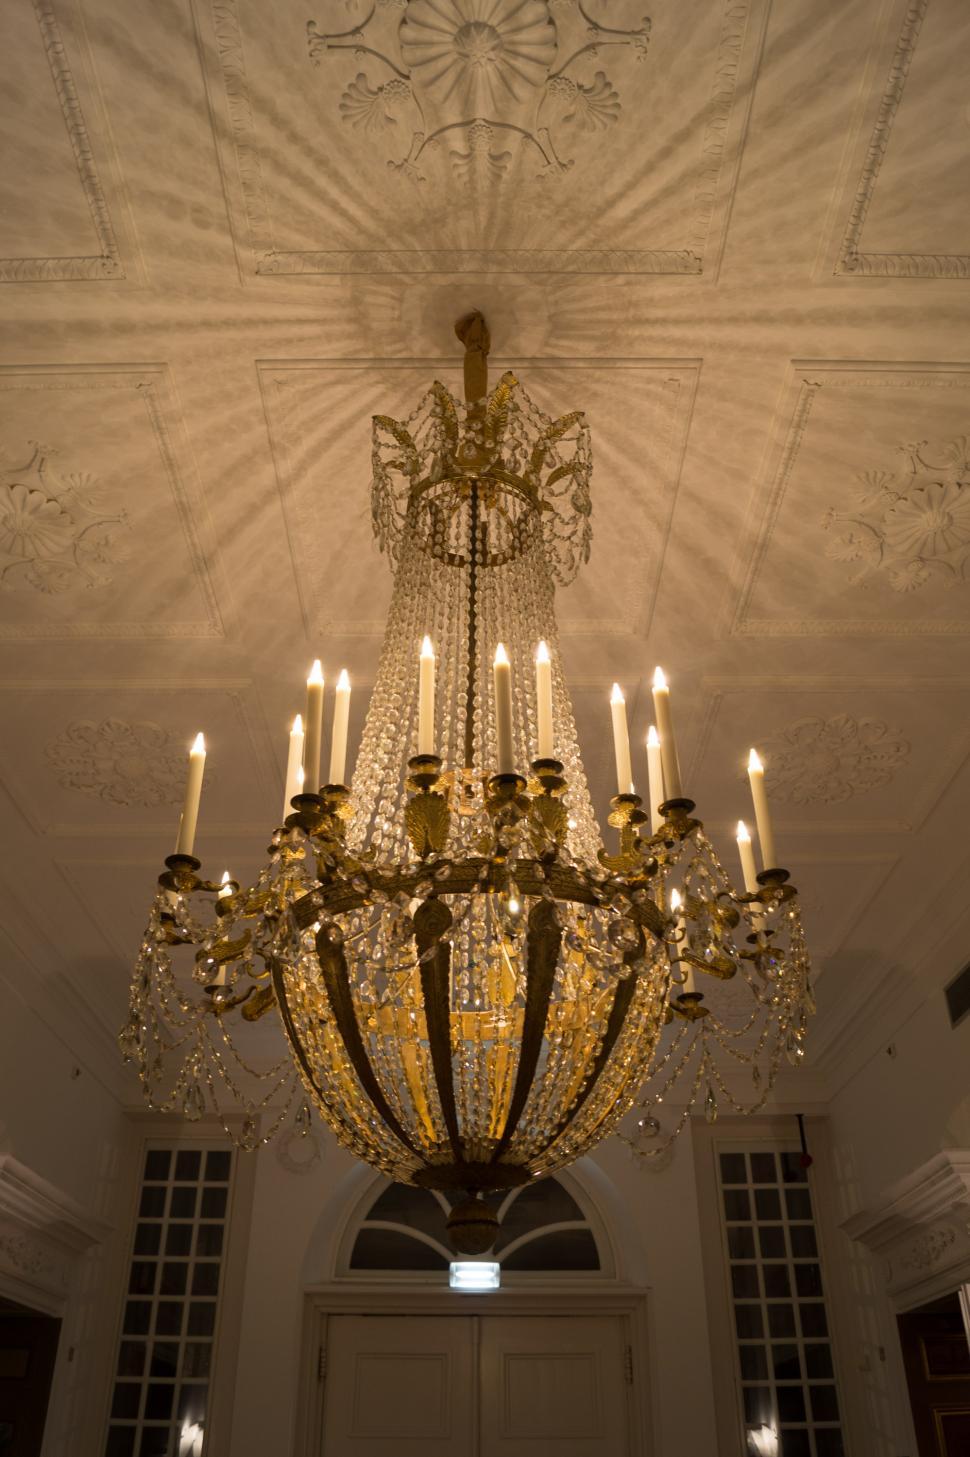 Free Image of Elegant Chandelier Hanging From Building Ceiling 